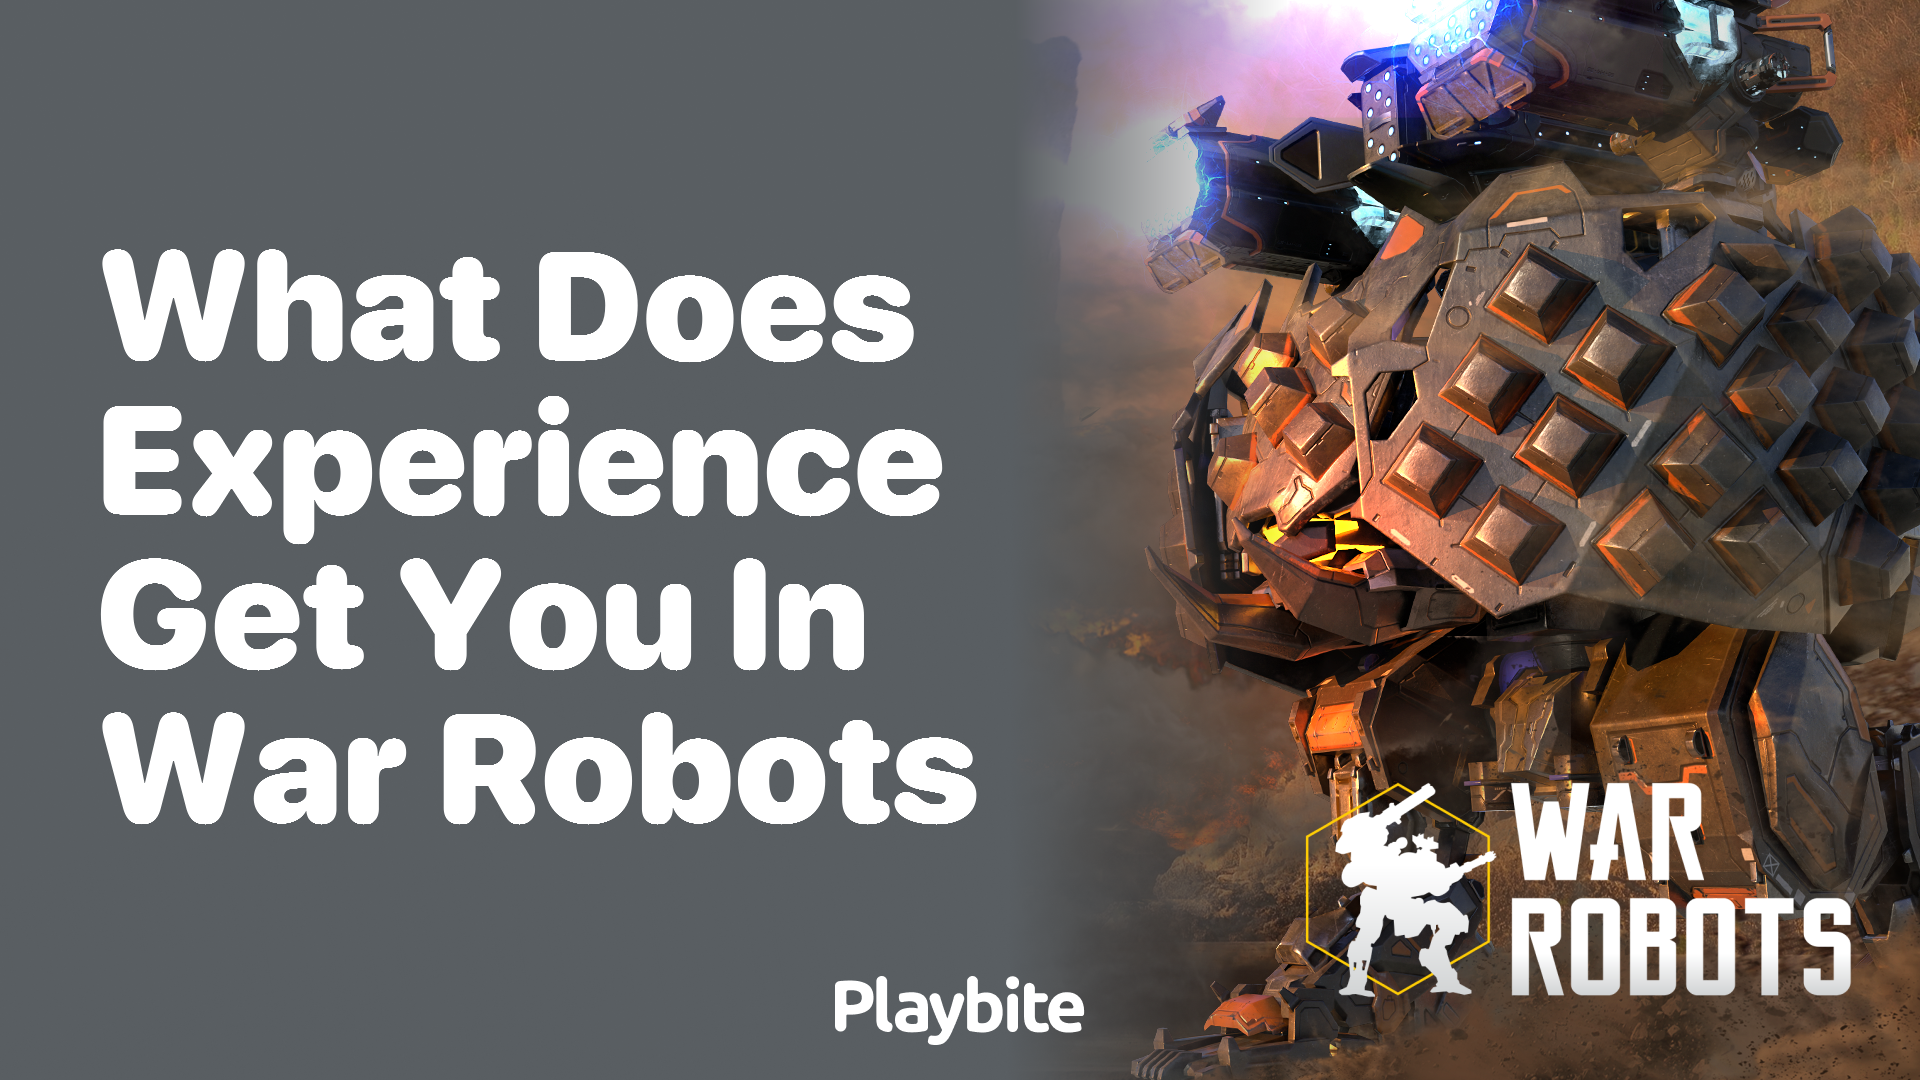 What Does Experience Get You in War Robots?